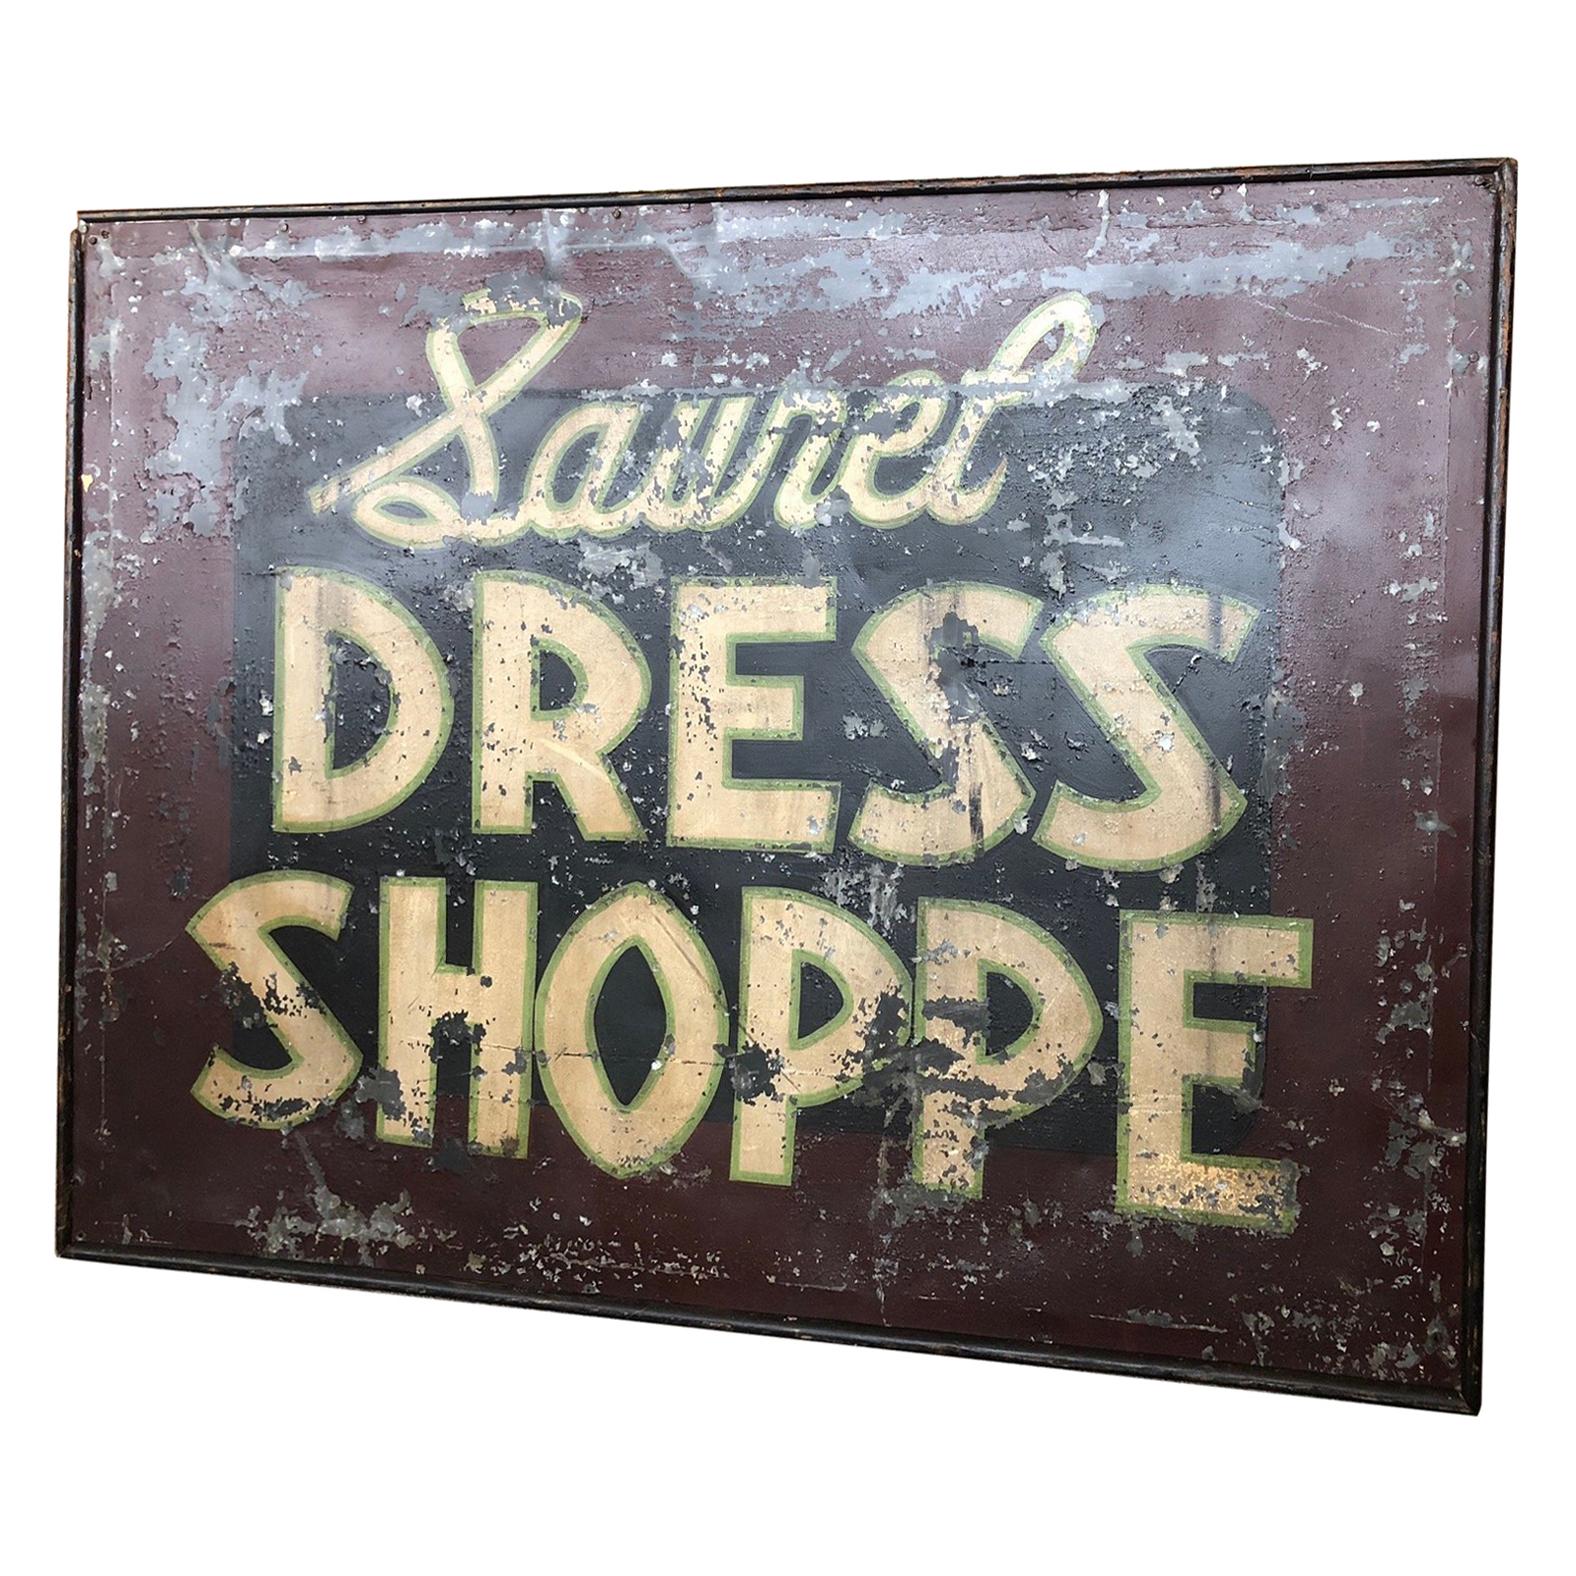 Trade Sign of Tin for Dress Shoppe For Sale